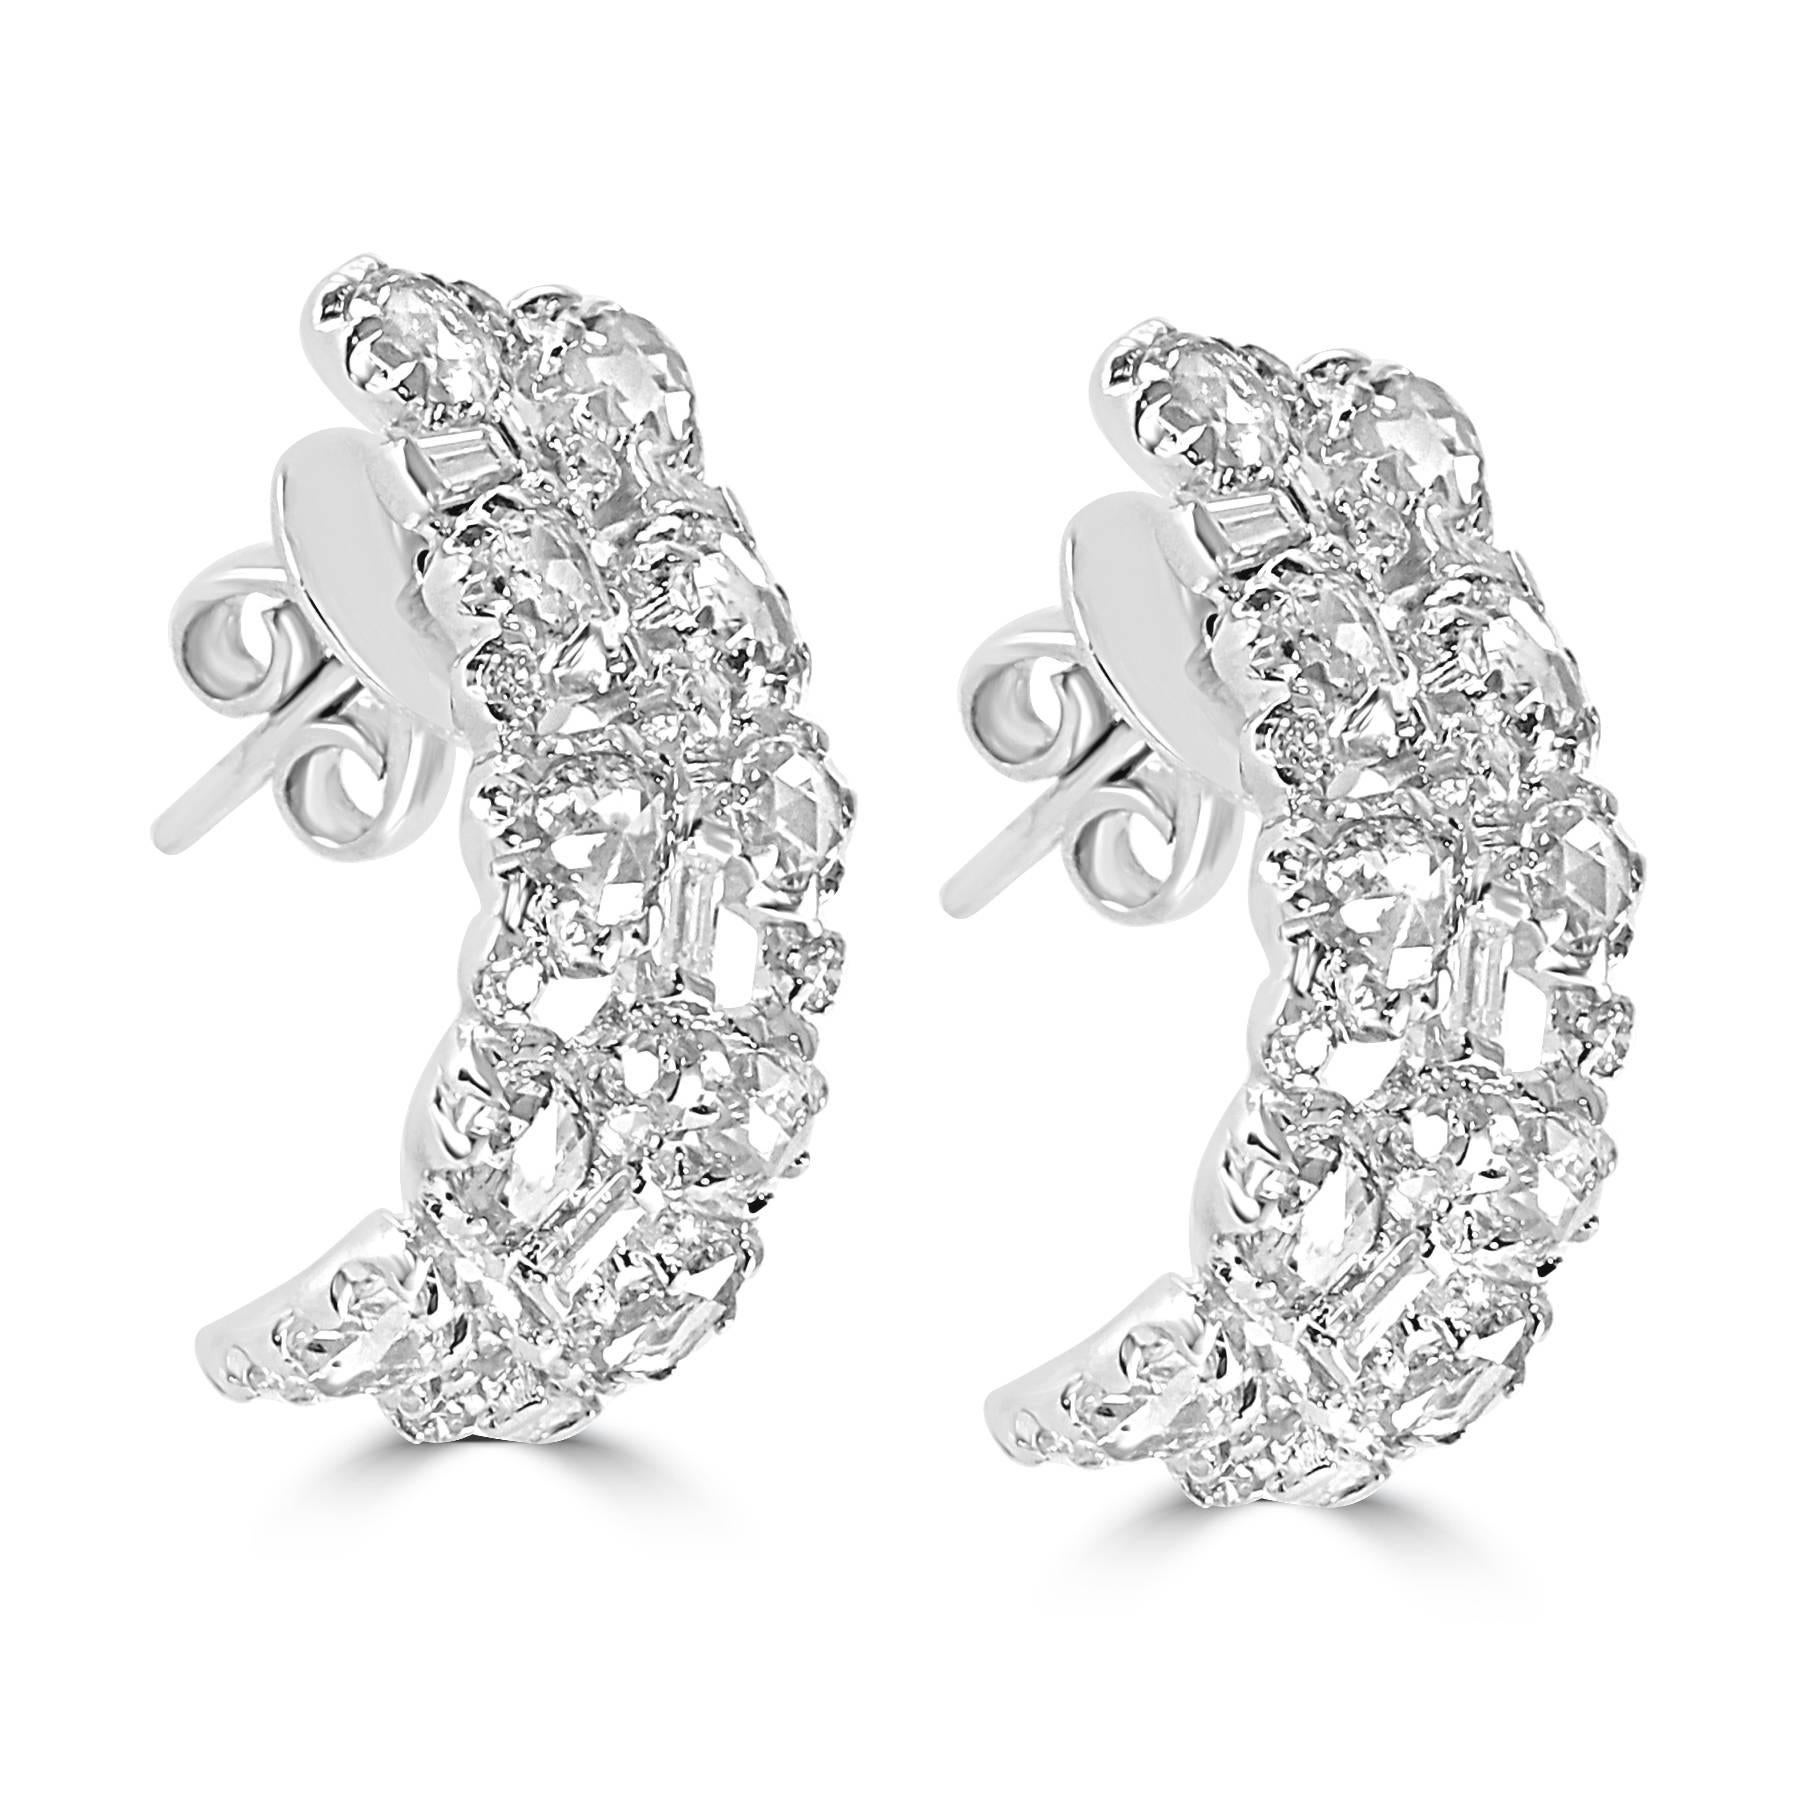 Rosecut Baguette Diamond Earrings with 2.57cts total diamond weight set in 18K Gold